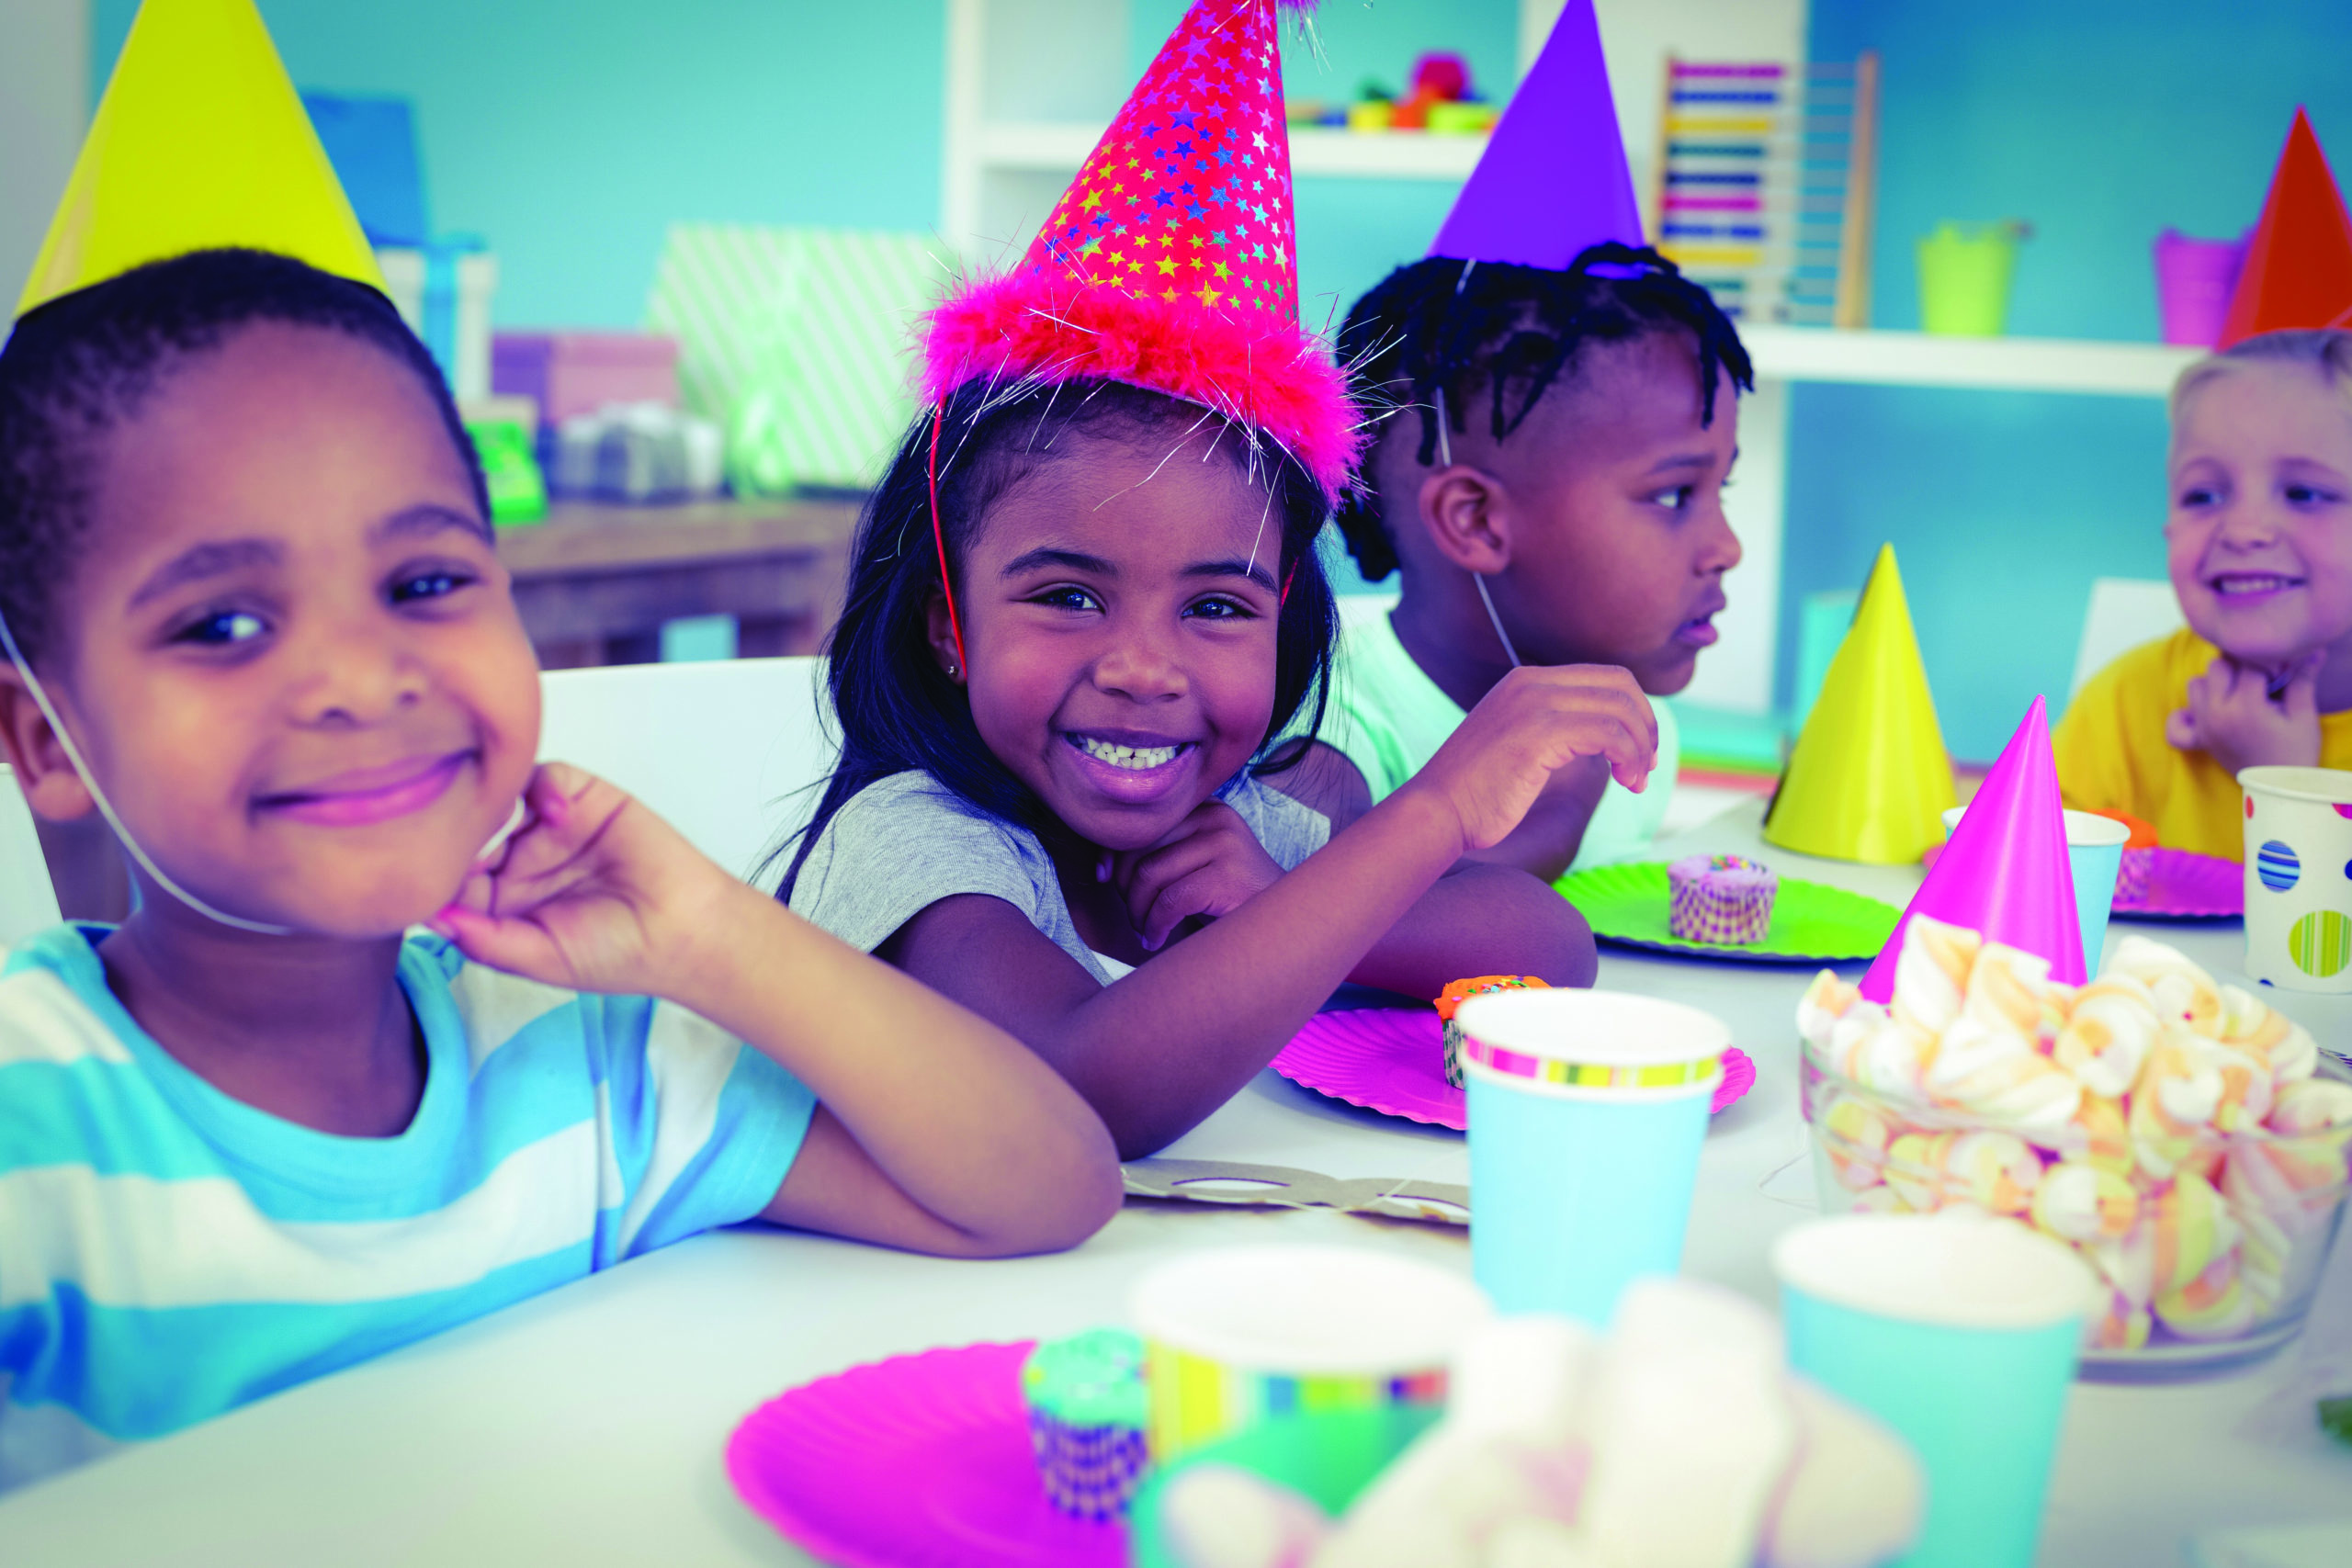 Kids at birthday party - Party Professor 1122 - Adobe Stock image